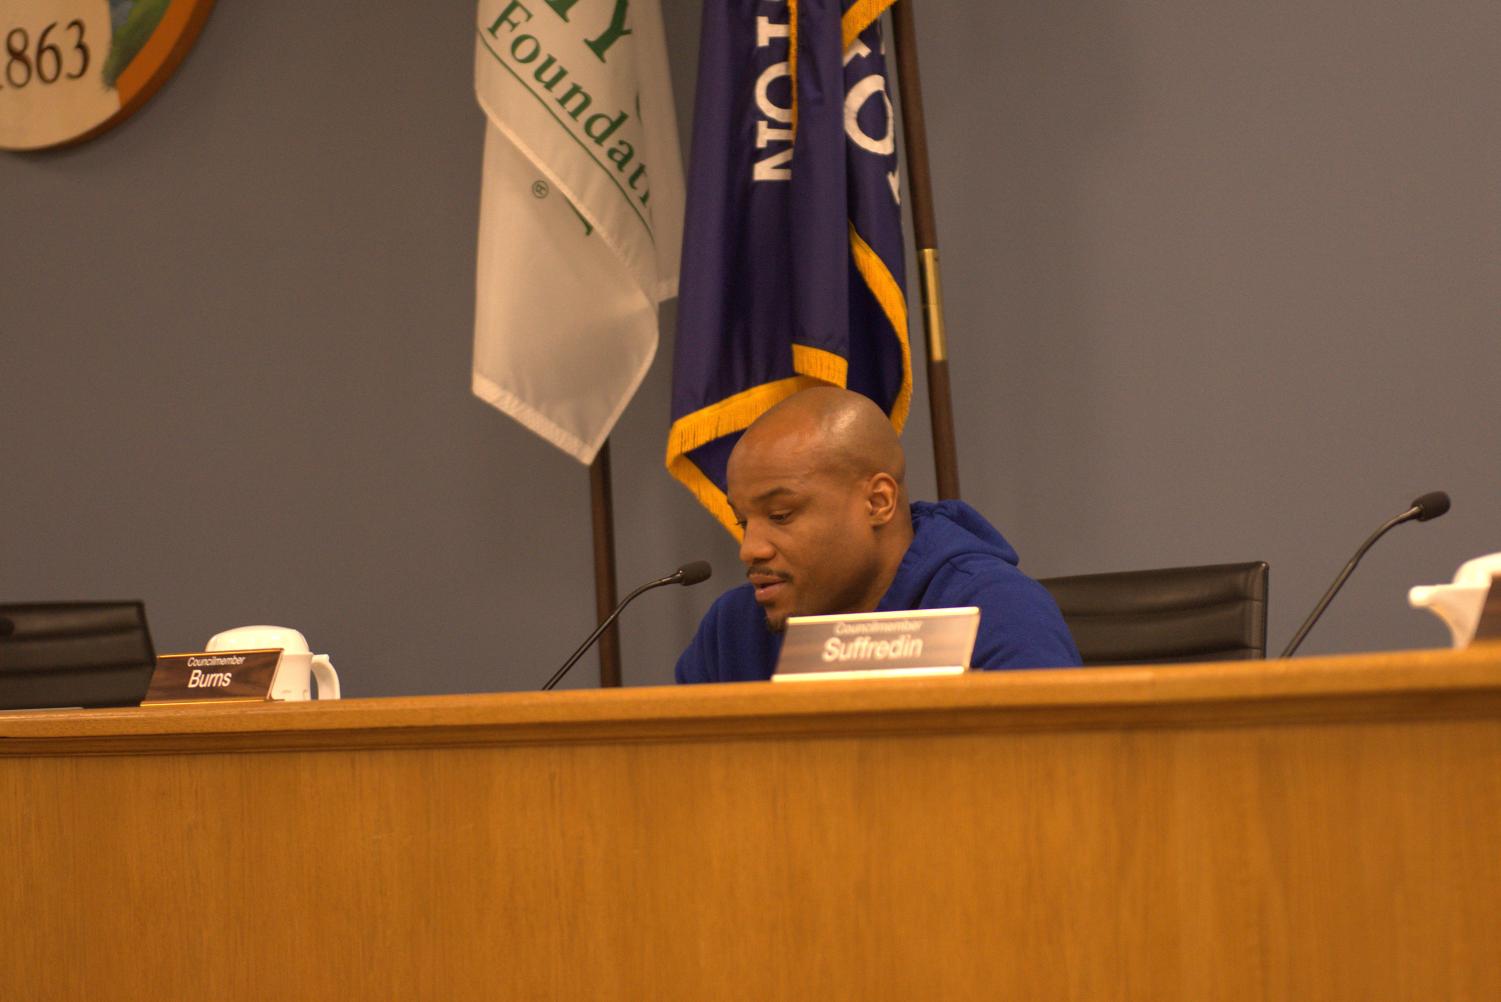 A+councilmember+wearing+blue+sits+in+front+of+flags+at+a+wooden+dais.